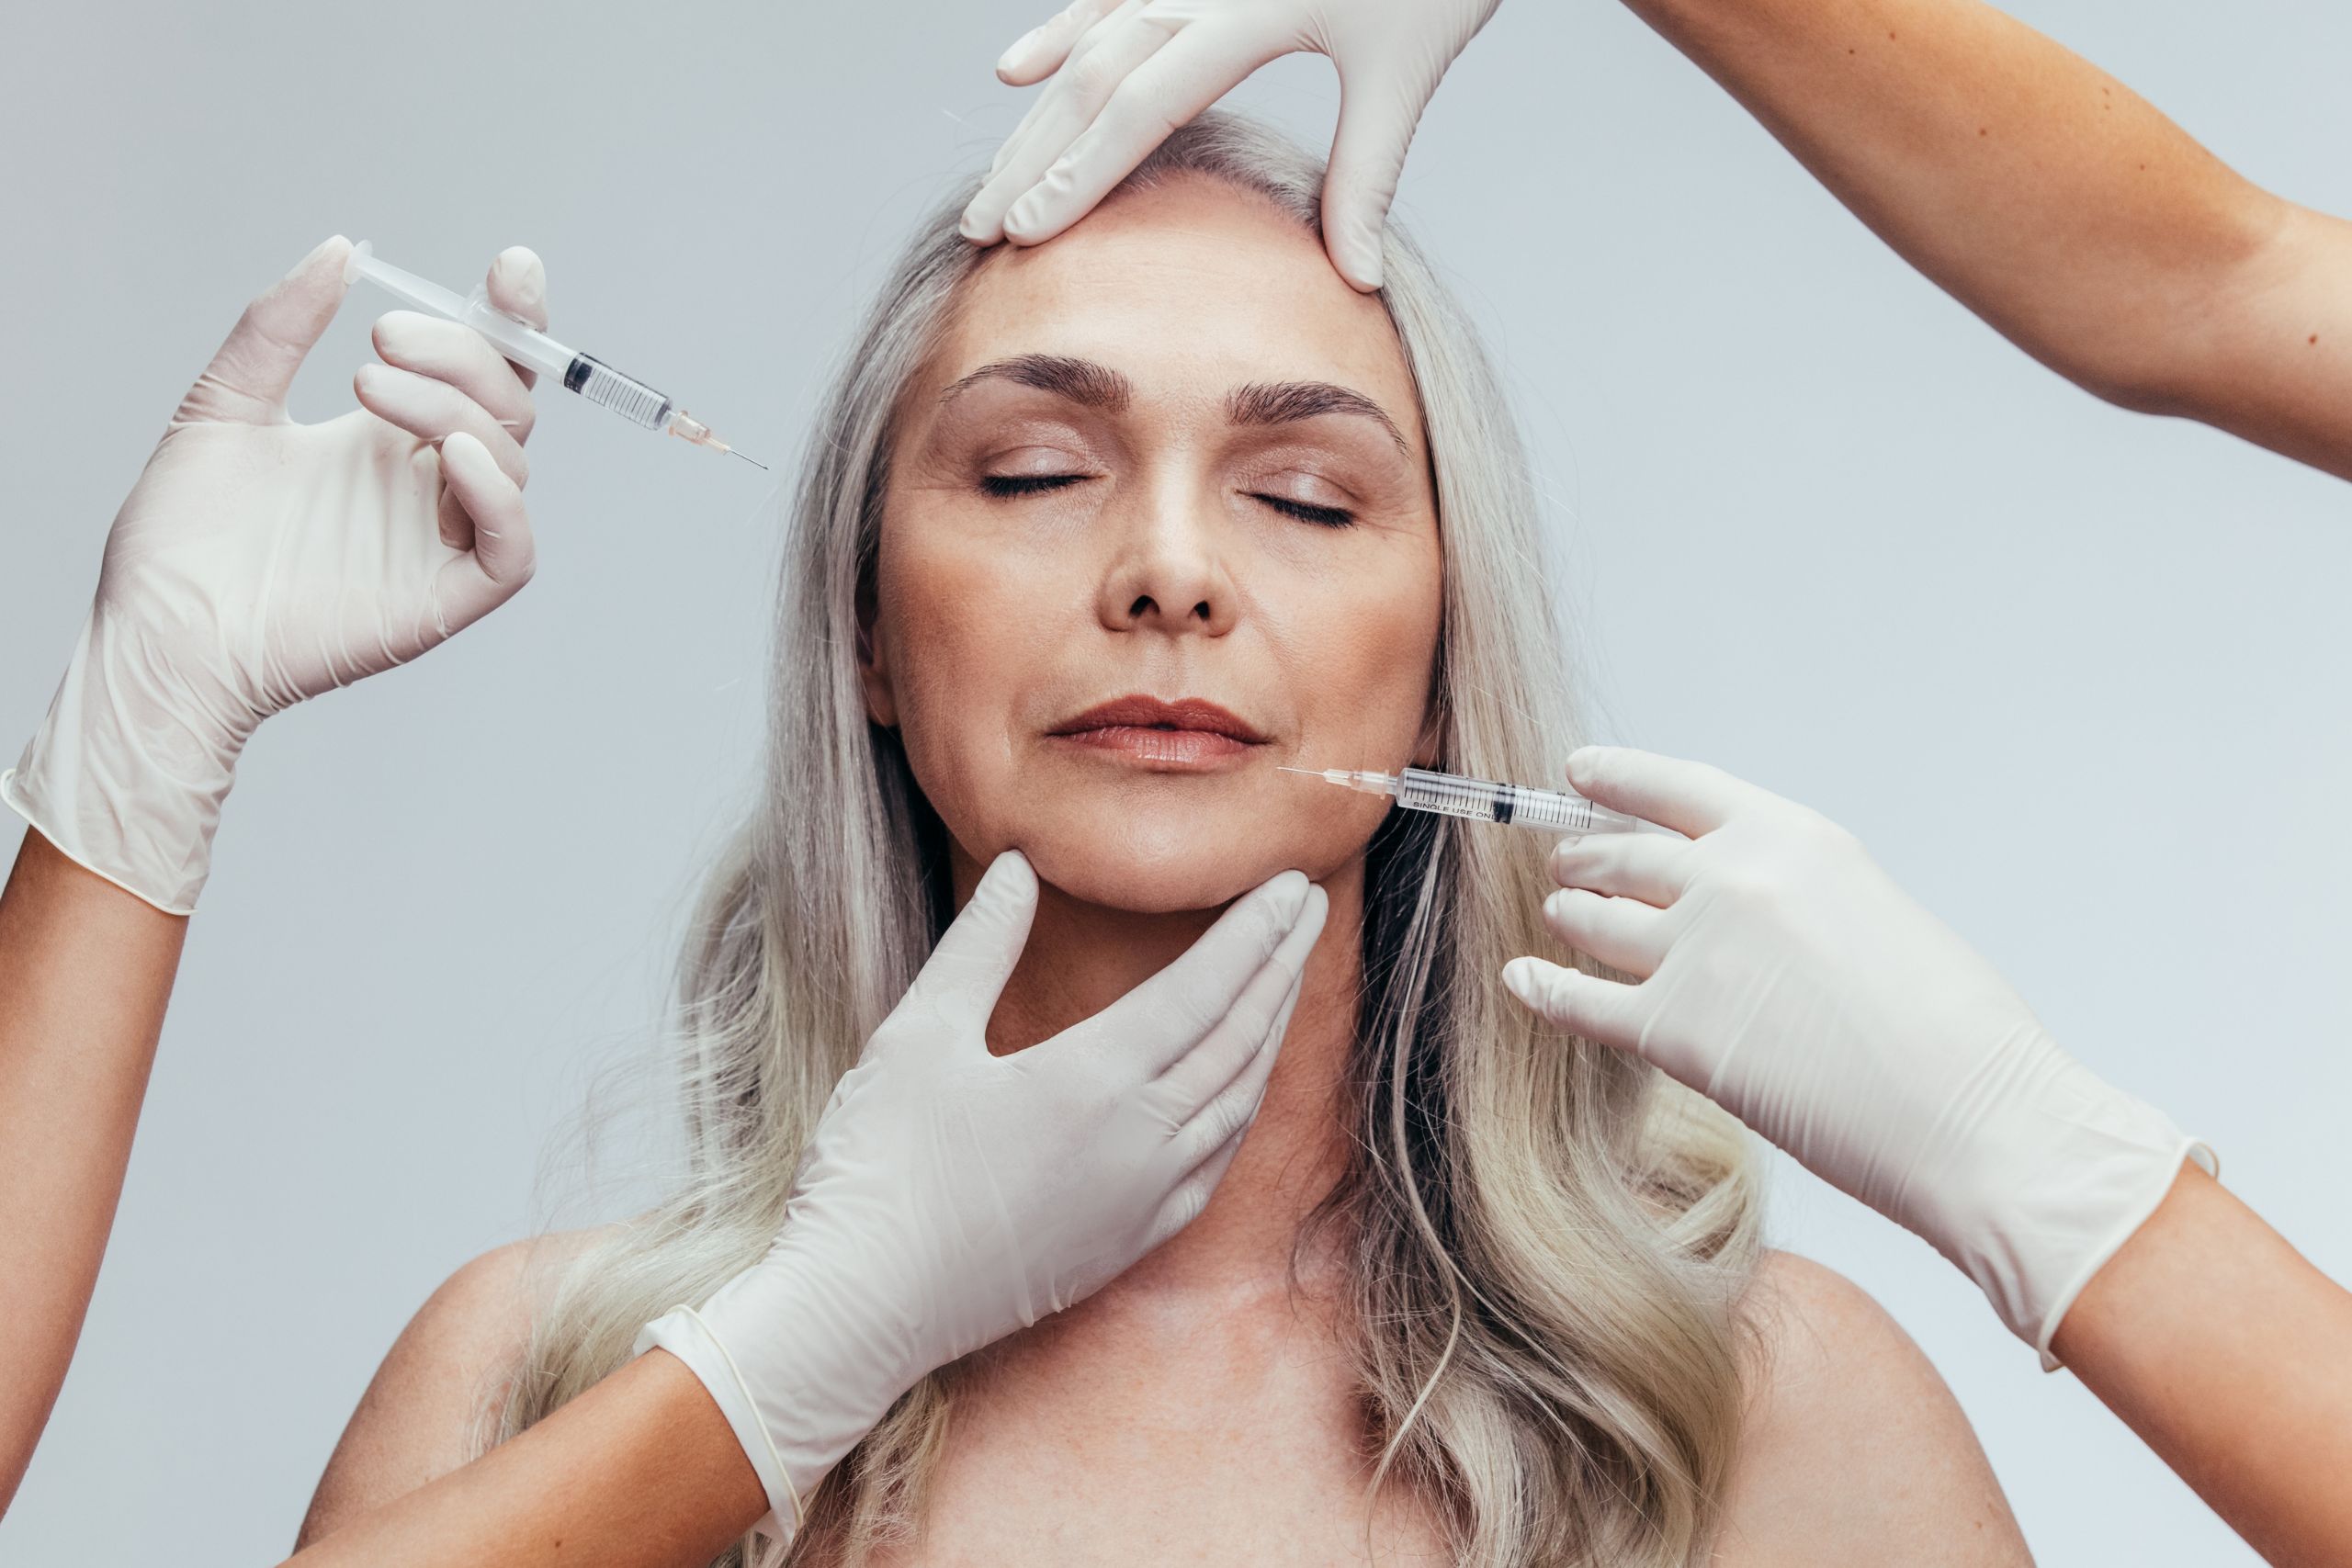 An artistic close-up of a middle-aged woman receiving facial injections